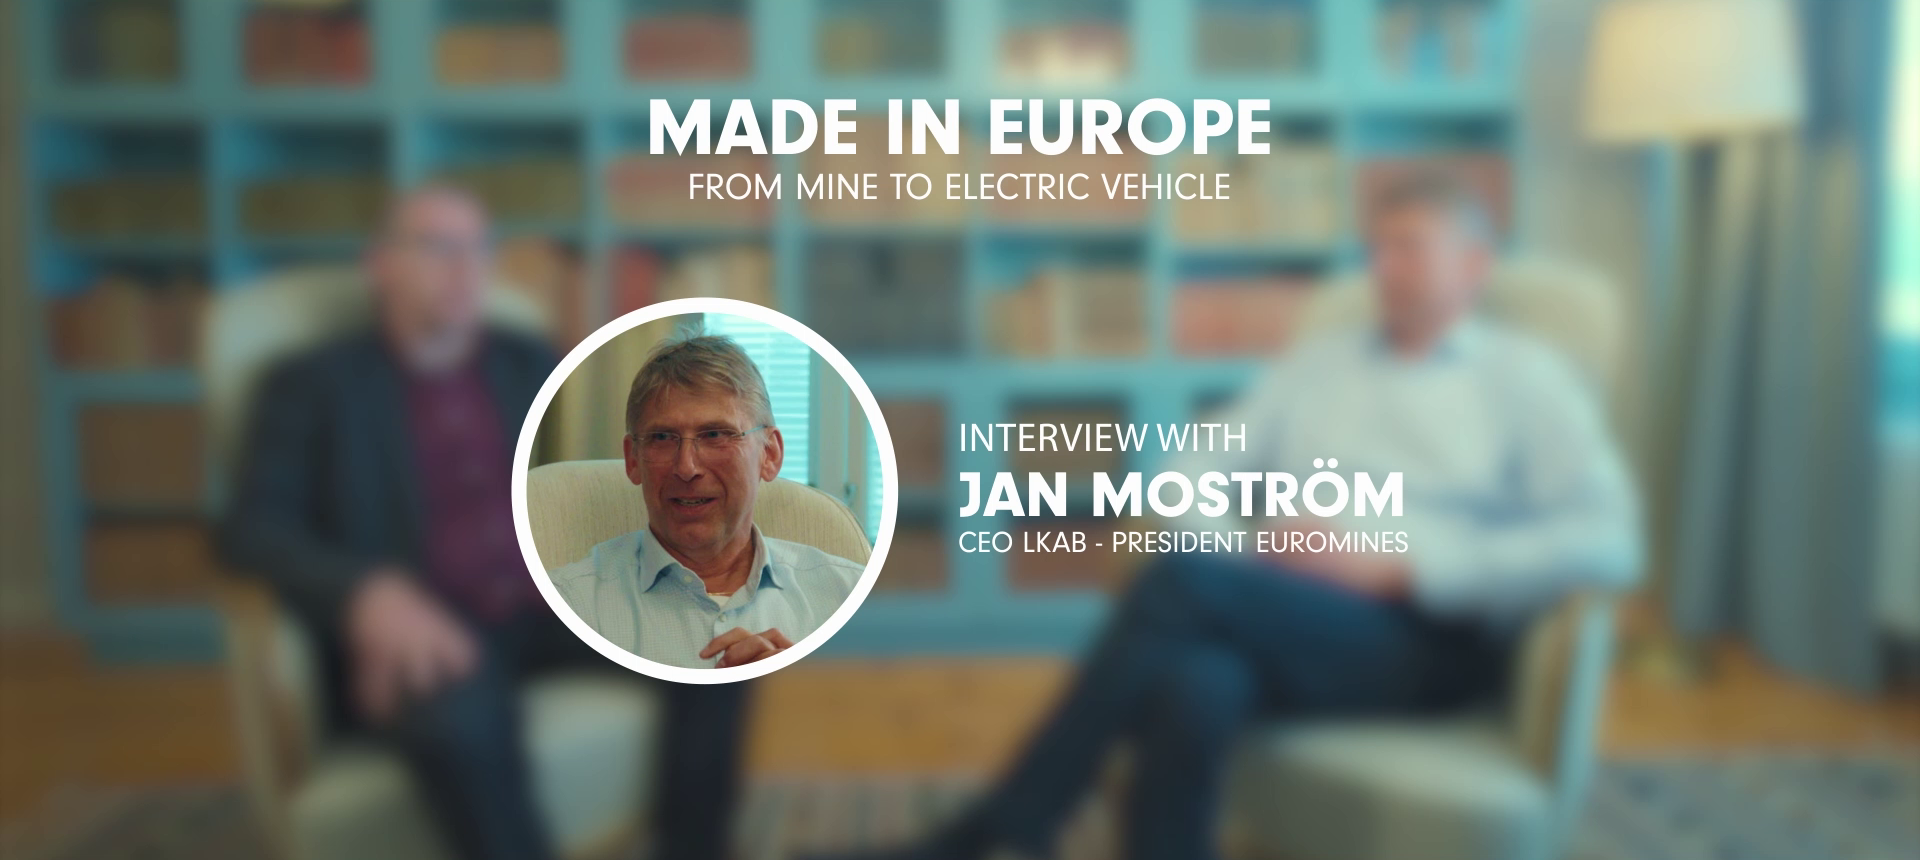 Made in Europe JAN MOSTROM